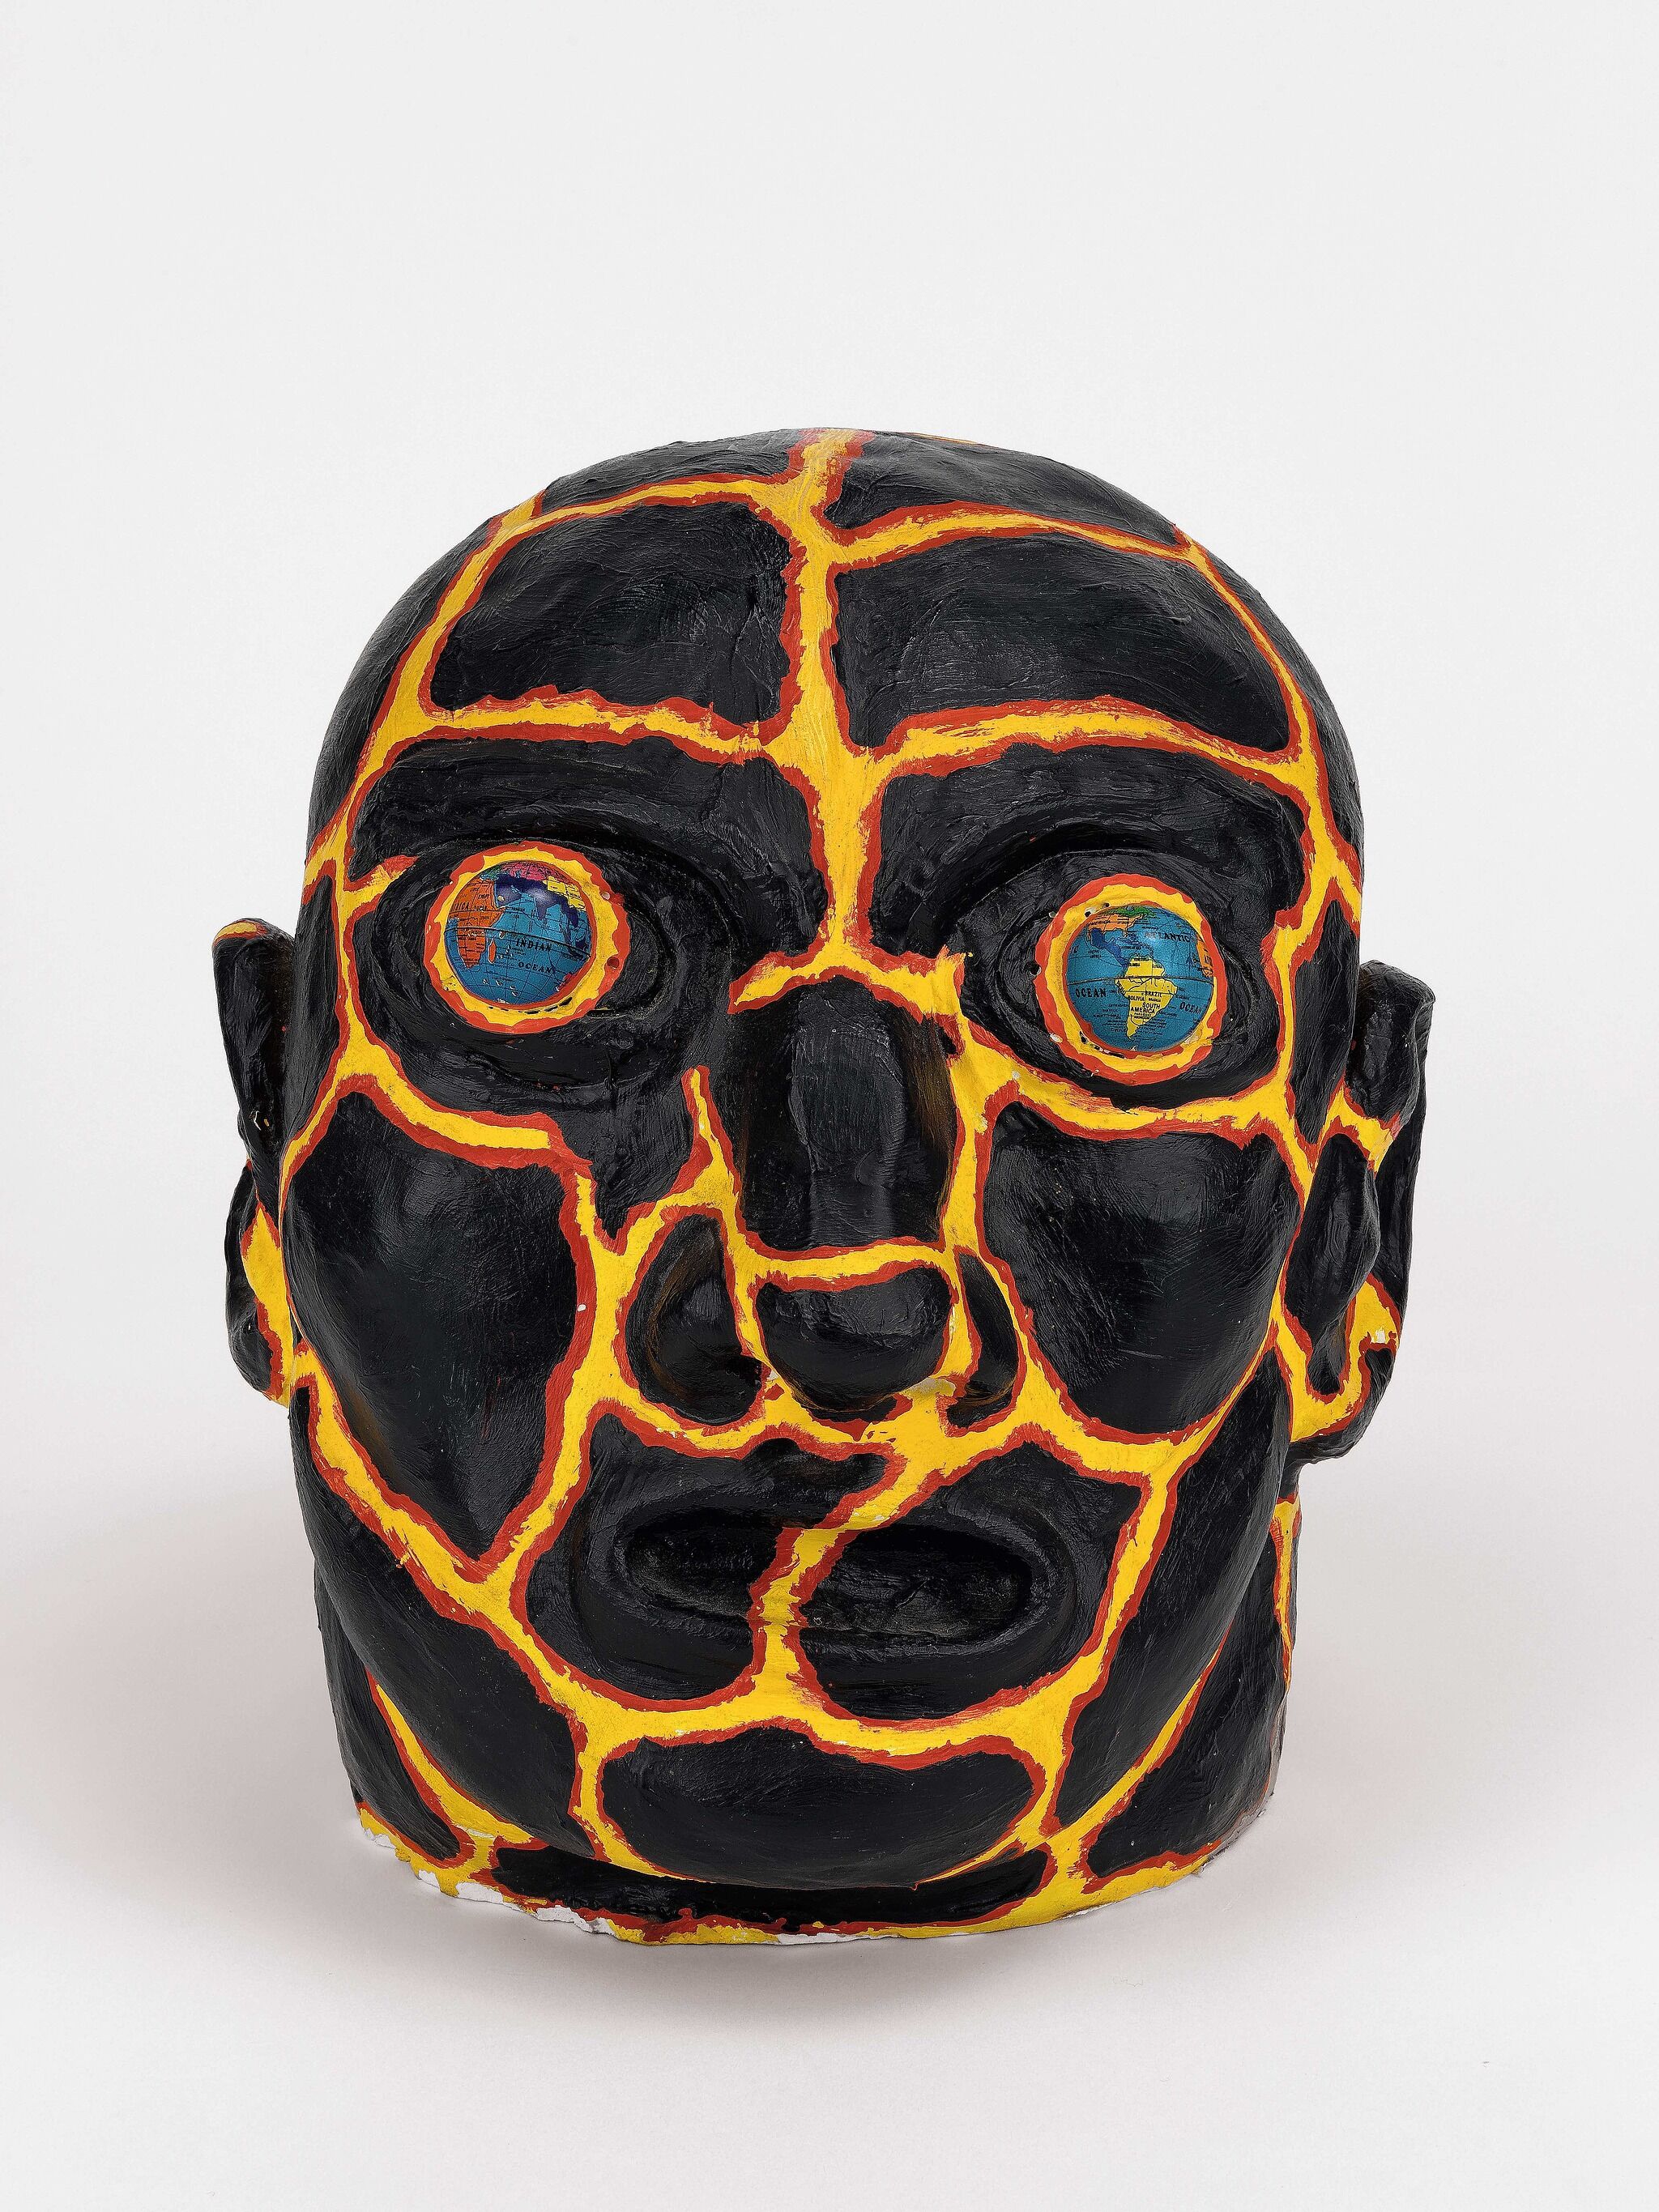 Painted head in black and yellow.